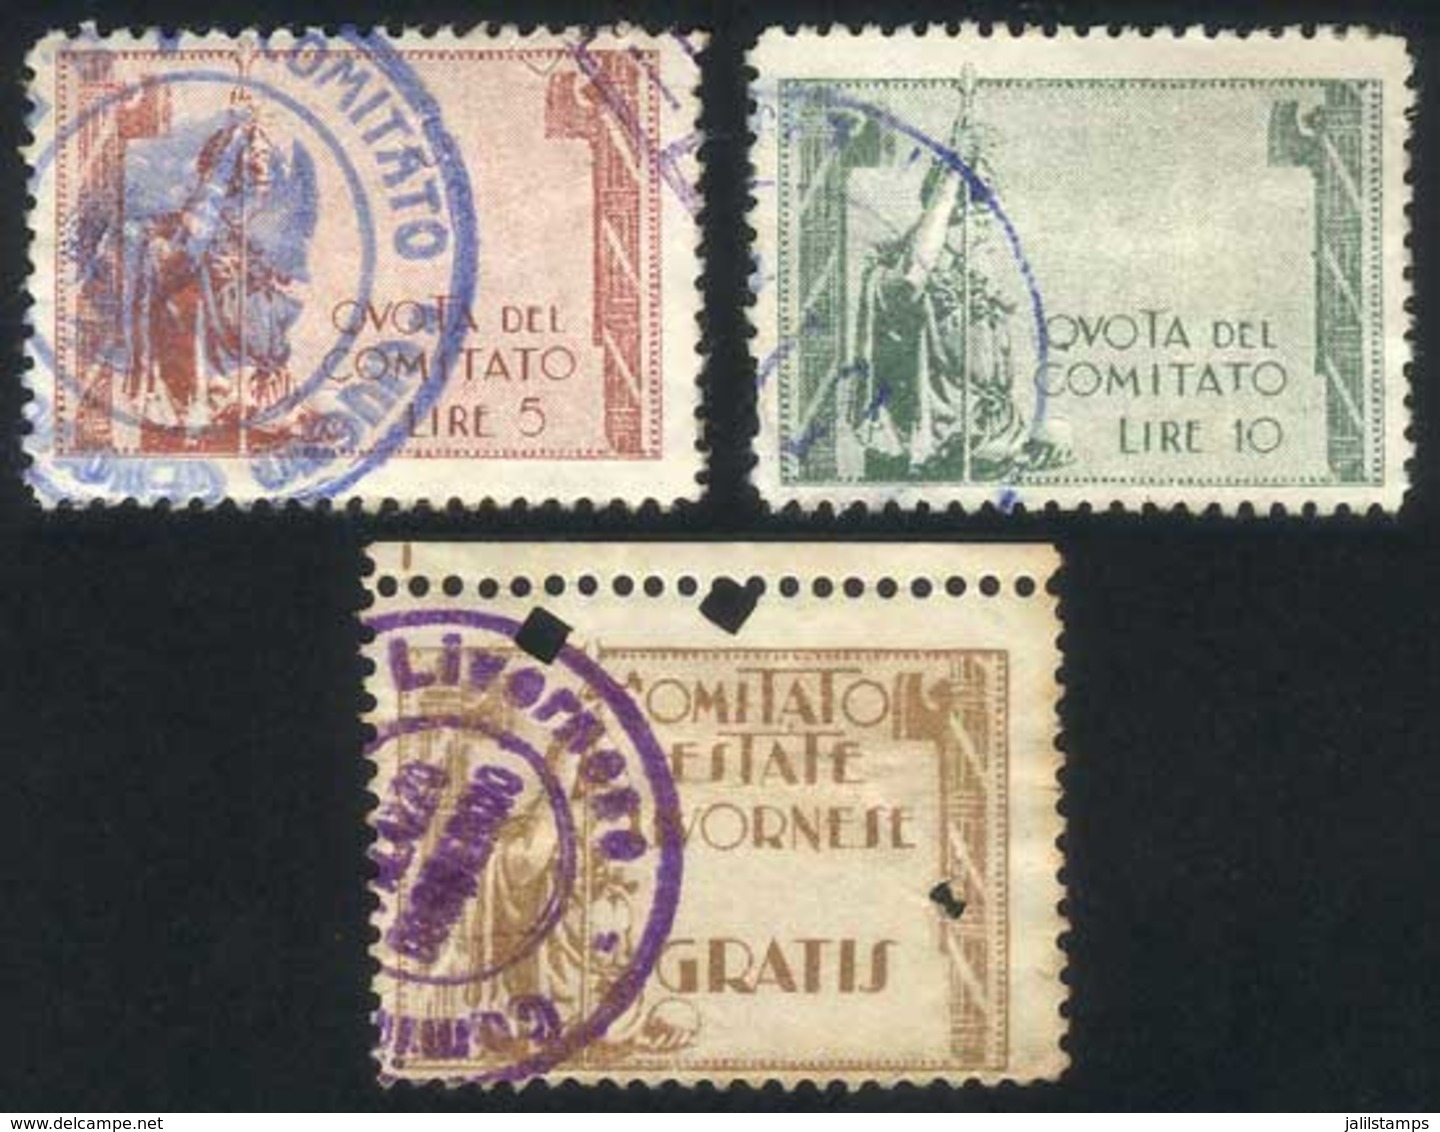 ITALY: 3 Cinderellas "Quota Del Comitato", Fine Quality, With Minor Defects (very Fine Appeal)" - Unclassified